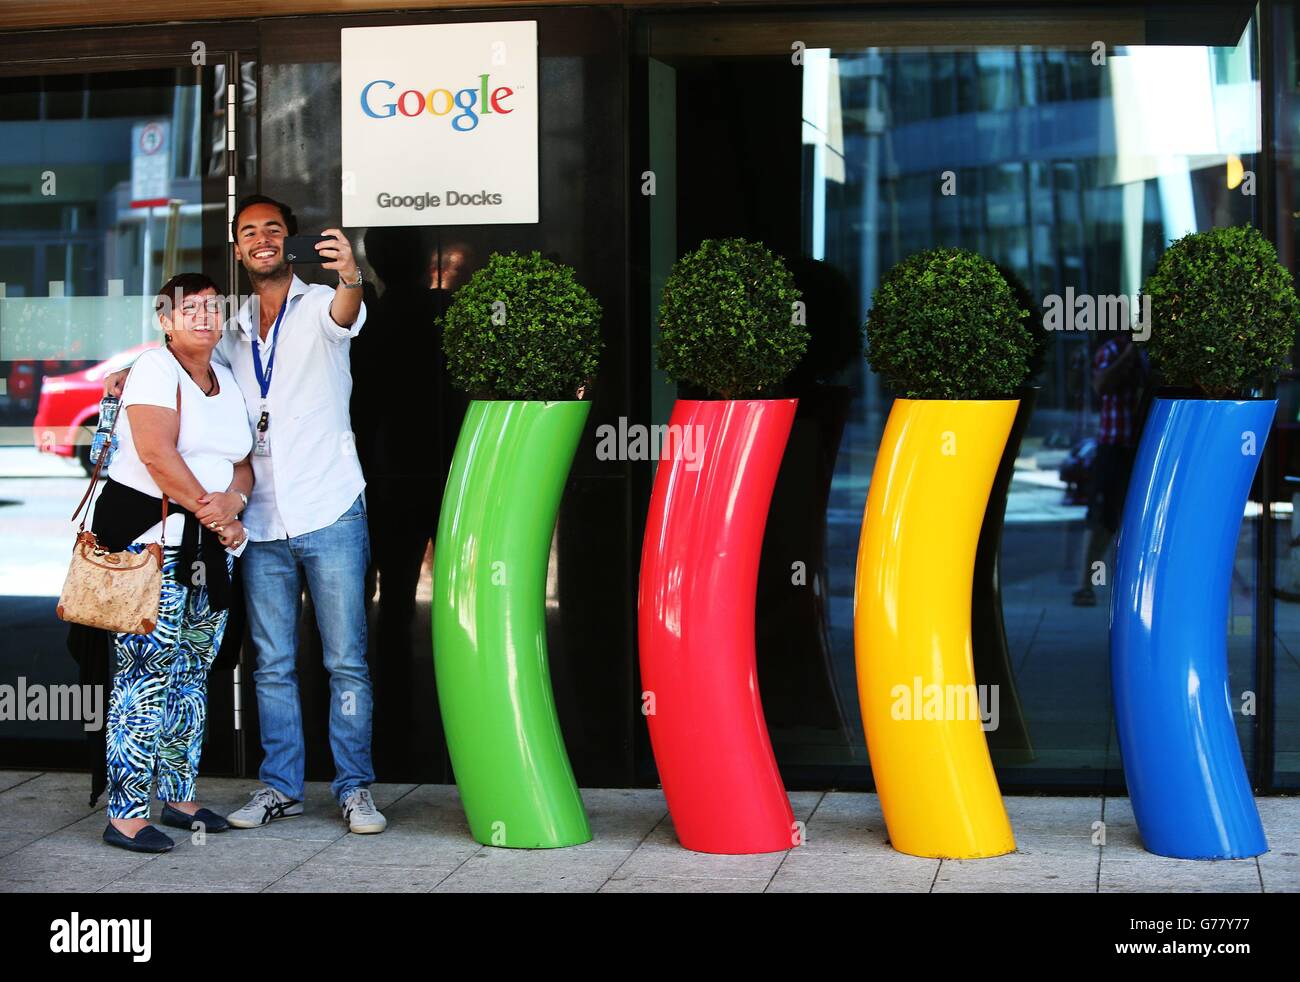 People take a selfie outside Google headquarters known as the Googleplex on Dublin's Barrow Street, as Jobs Minister Richard Bruton has defended luring companies to Ireland after US president Barack Obama accused multinationals of relocating to exploit unpatriotic tax loopholes. Stock Photo